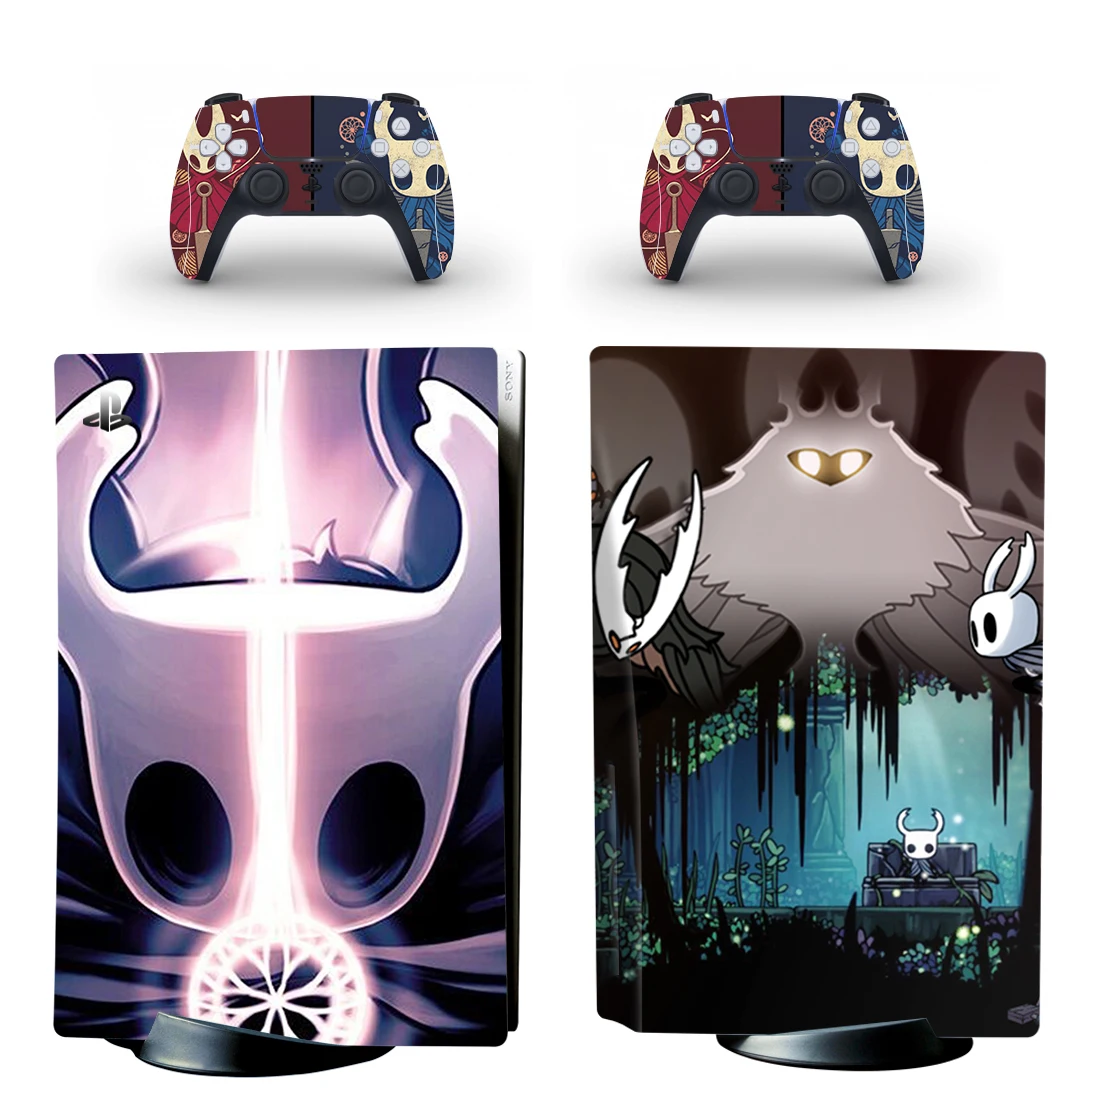 Hollow Knight Ps5 Standard Disc Skin Sticker Decal Cover For Playstation 5  Console & Controller Ps5 Skin Sticker Vinyl - Stickers - AliExpress